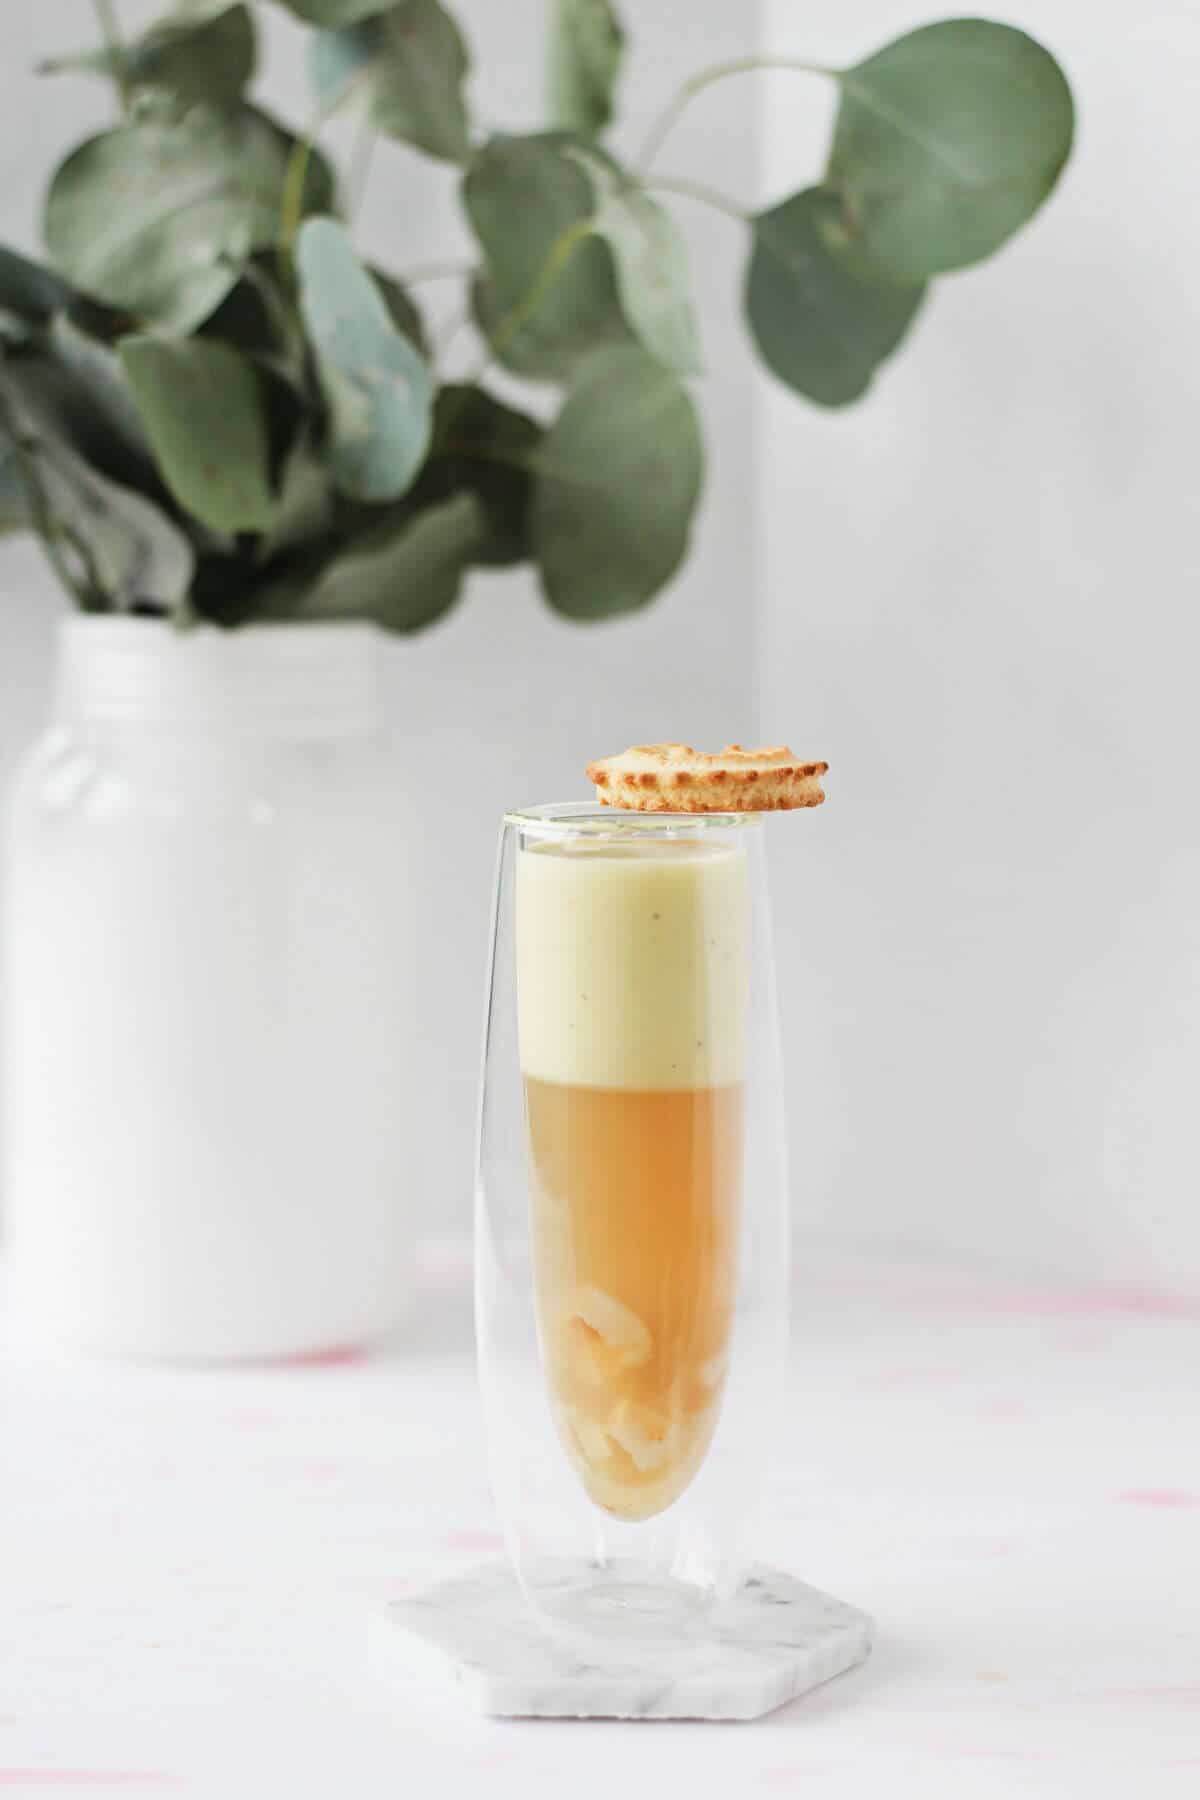 Clear champagne glass filled with orange-ish colored tea jelly mixed with chopped lychee, topped with off-white coconut custard and a crispy cookie.